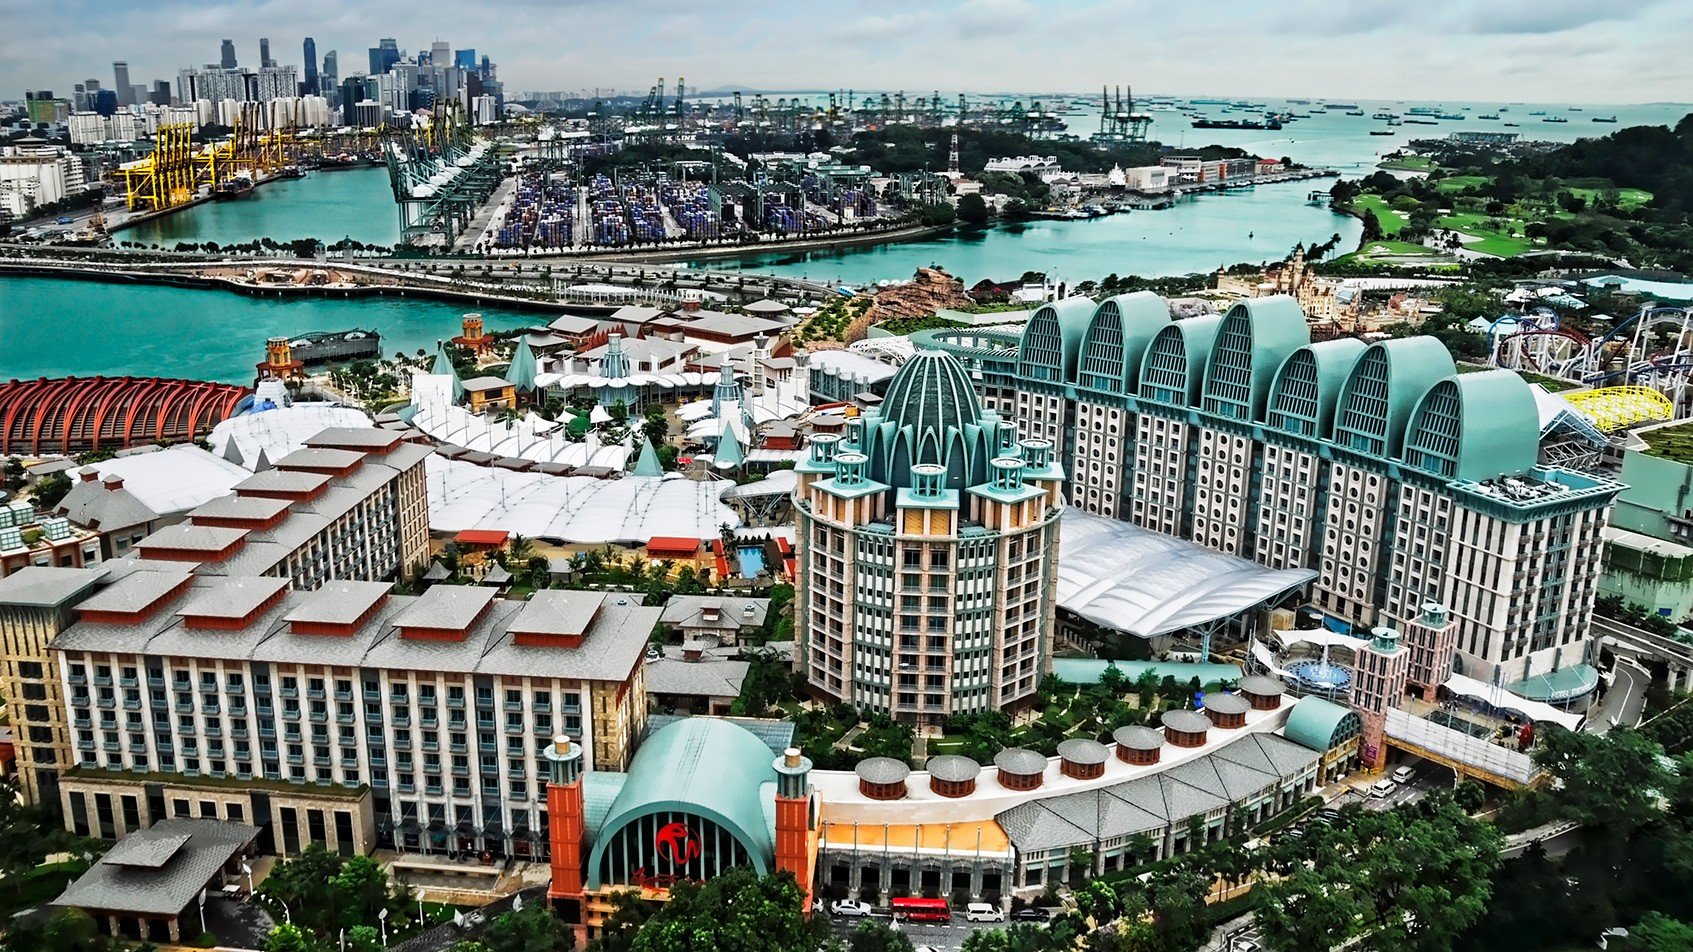 resorts-world-sentosa-incurs-$1.66-million-penalty-for-noncompliance-in-patron-deposit-checks